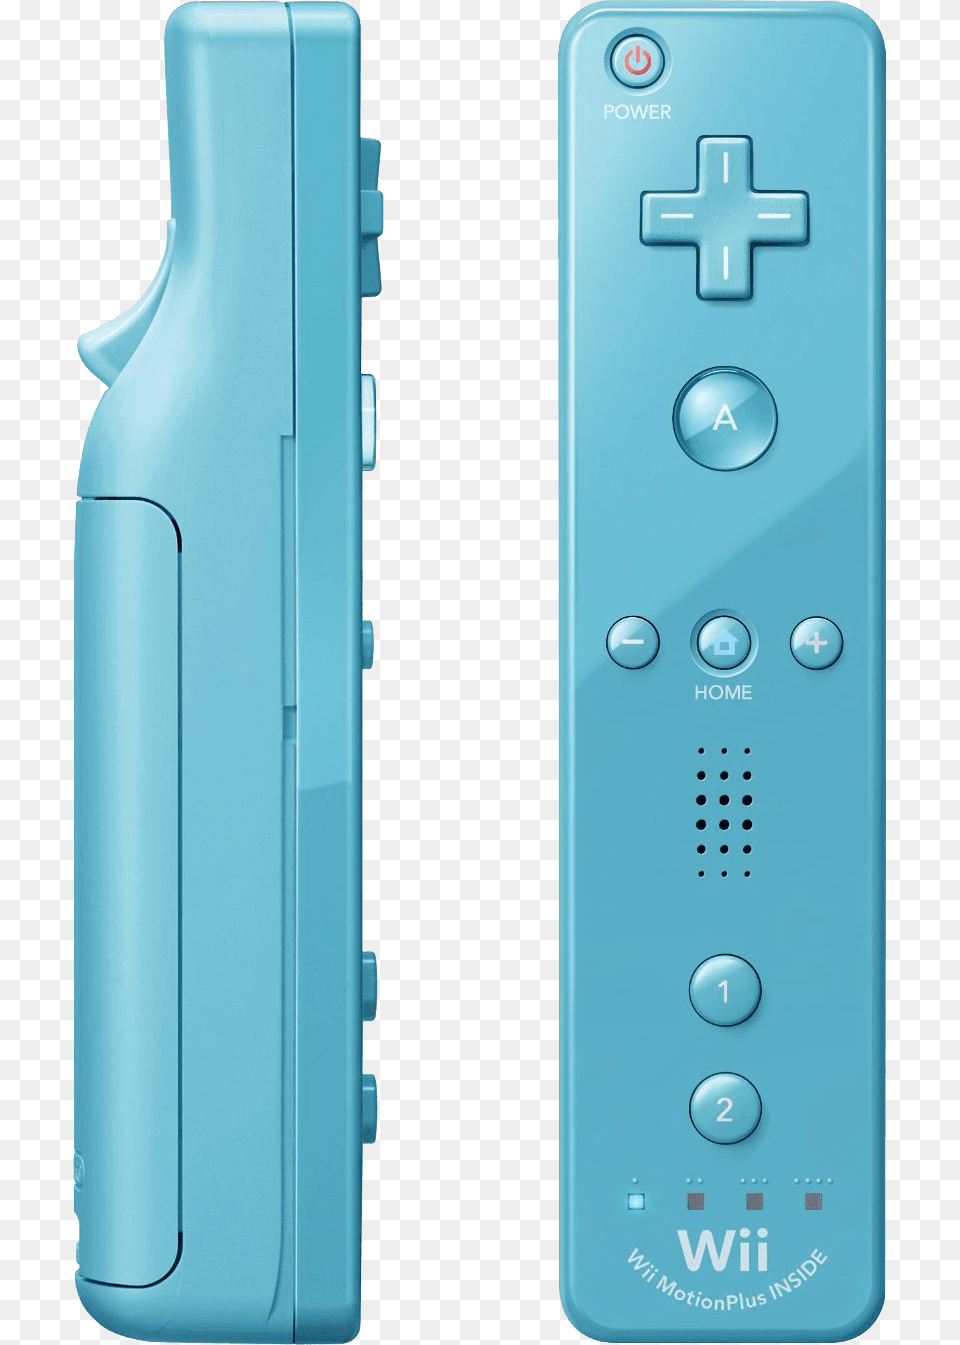 Wii Plus Remote Blue Wii Remote Plus, Electronics, Mobile Phone, Phone, Electrical Device Png Image